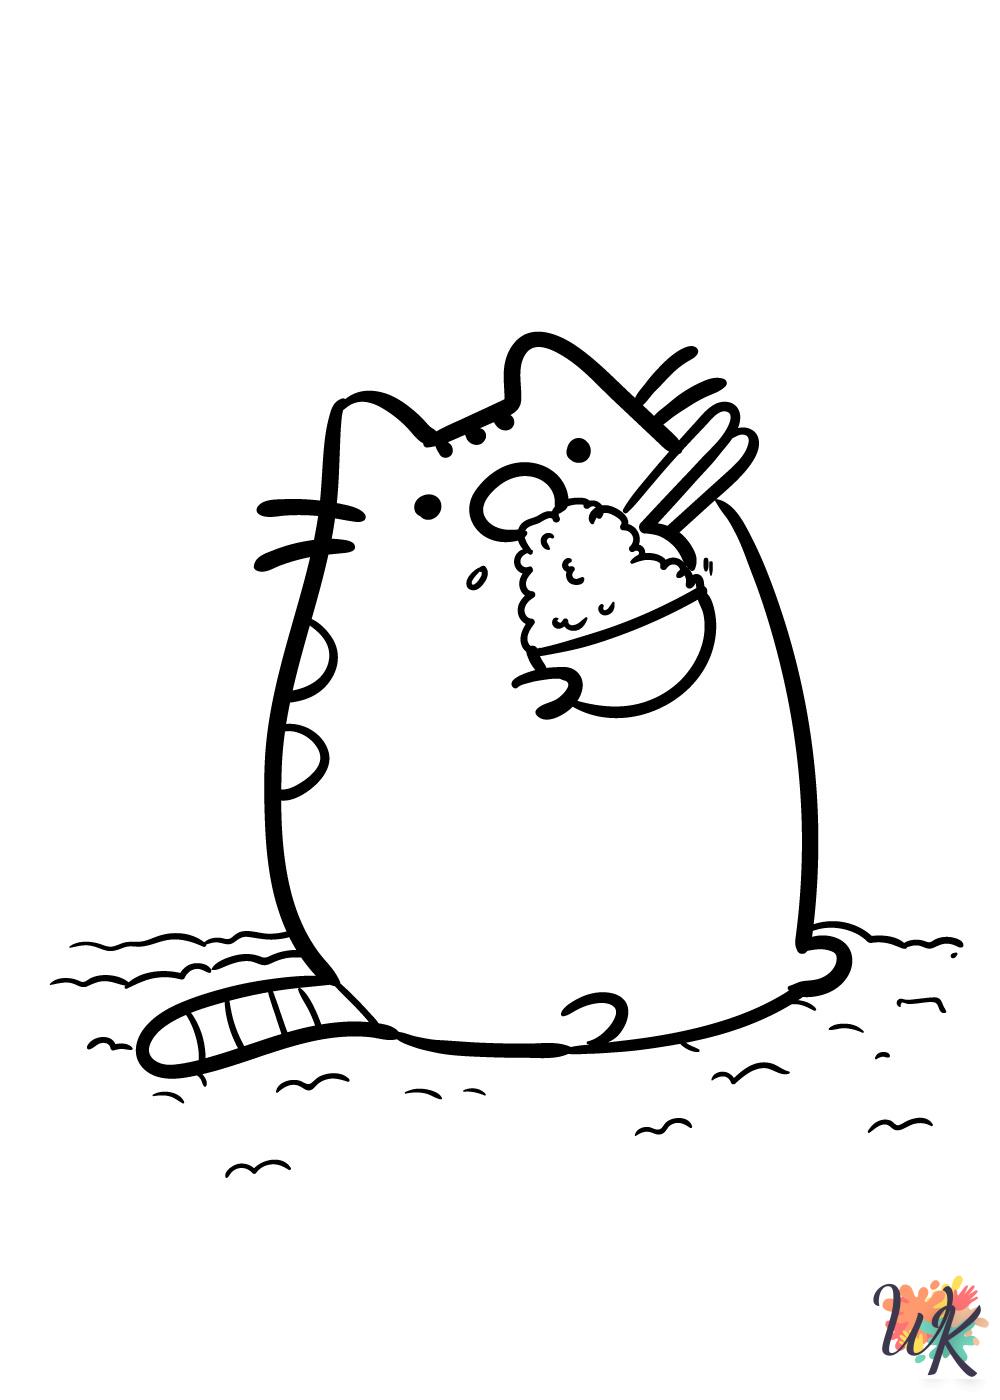 Pusheen free coloring pages